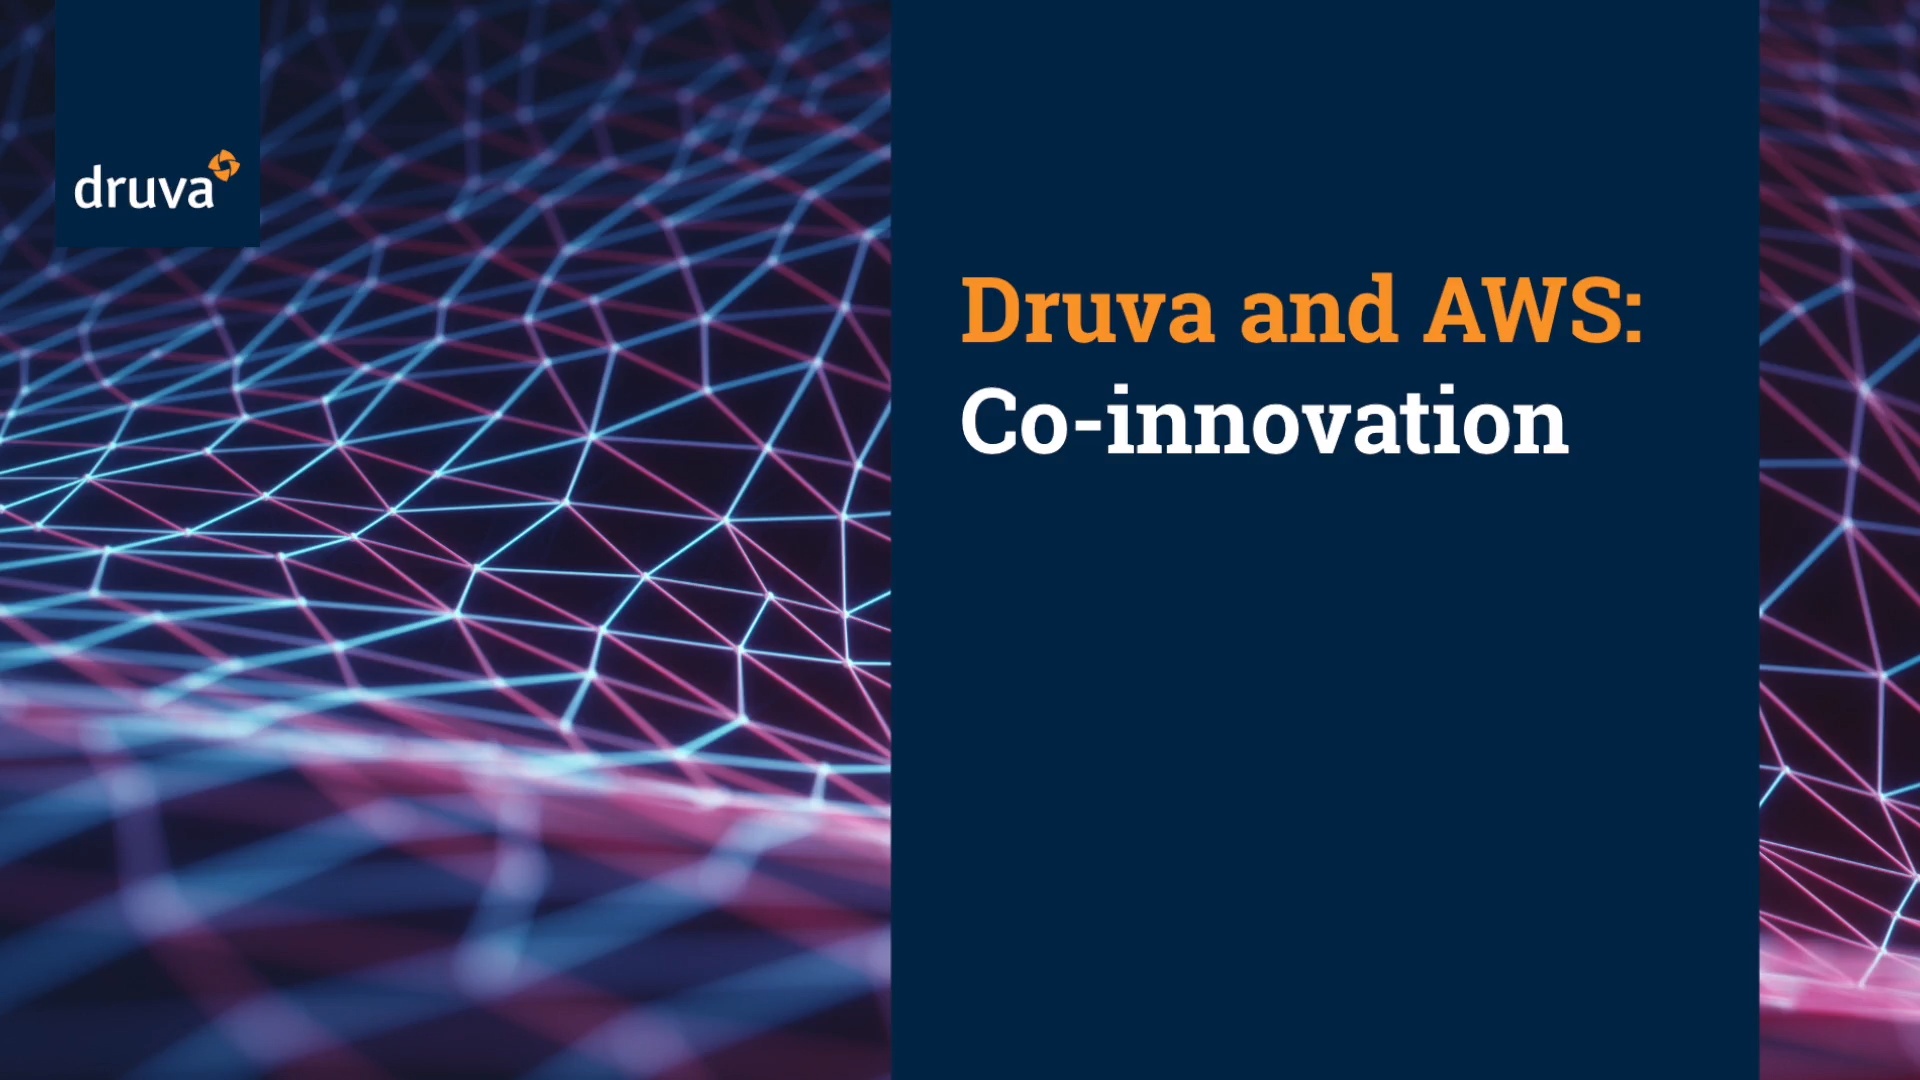 Druva and AWS: Co-innovation for customers